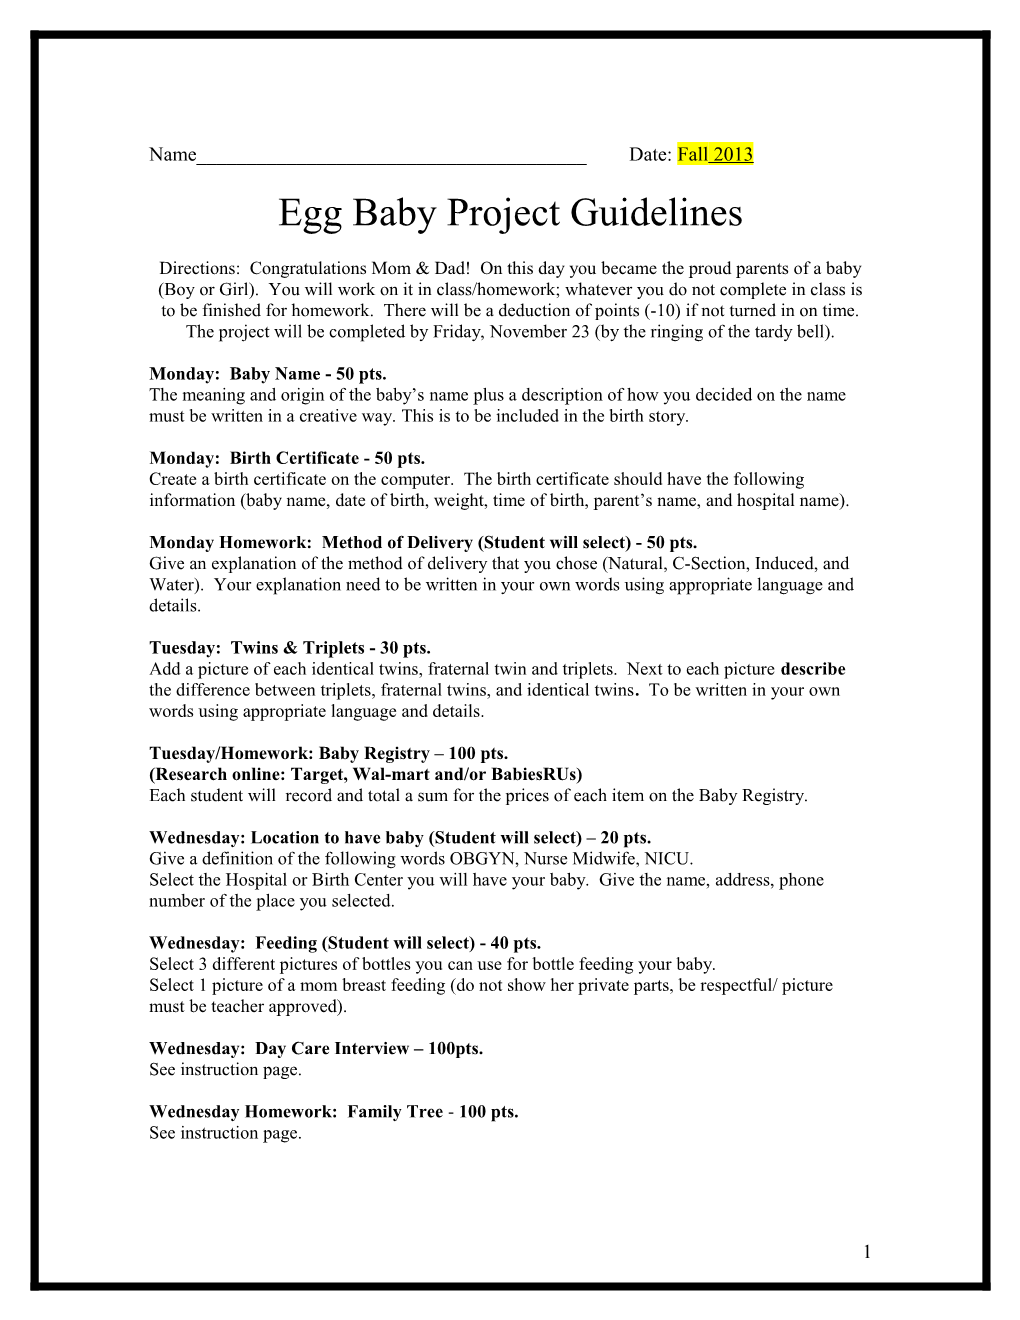 Ideas for Egg Baby Project